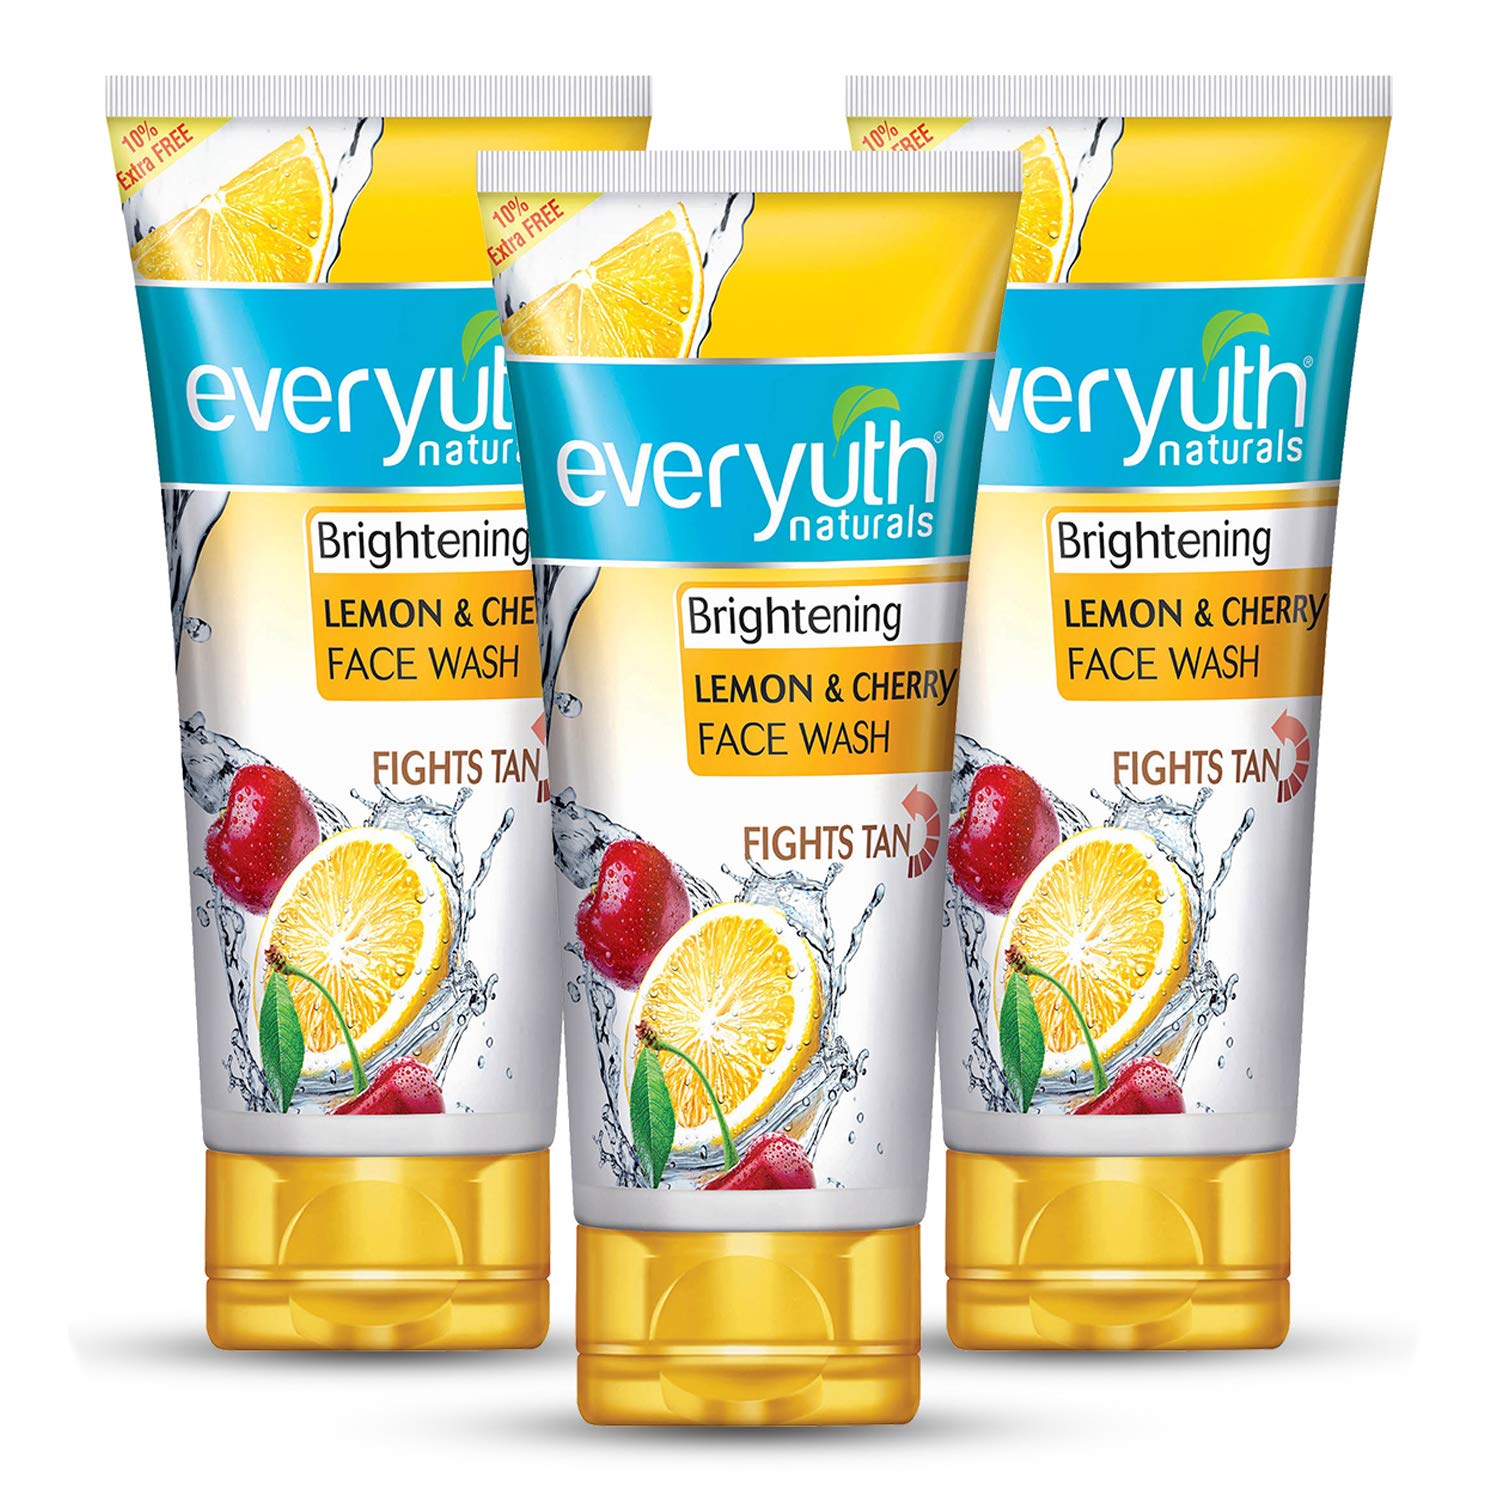 Everyuth Face Wash Lemon & Cherry (150gm each) - Pack of 3, Everyuth Face Wash 